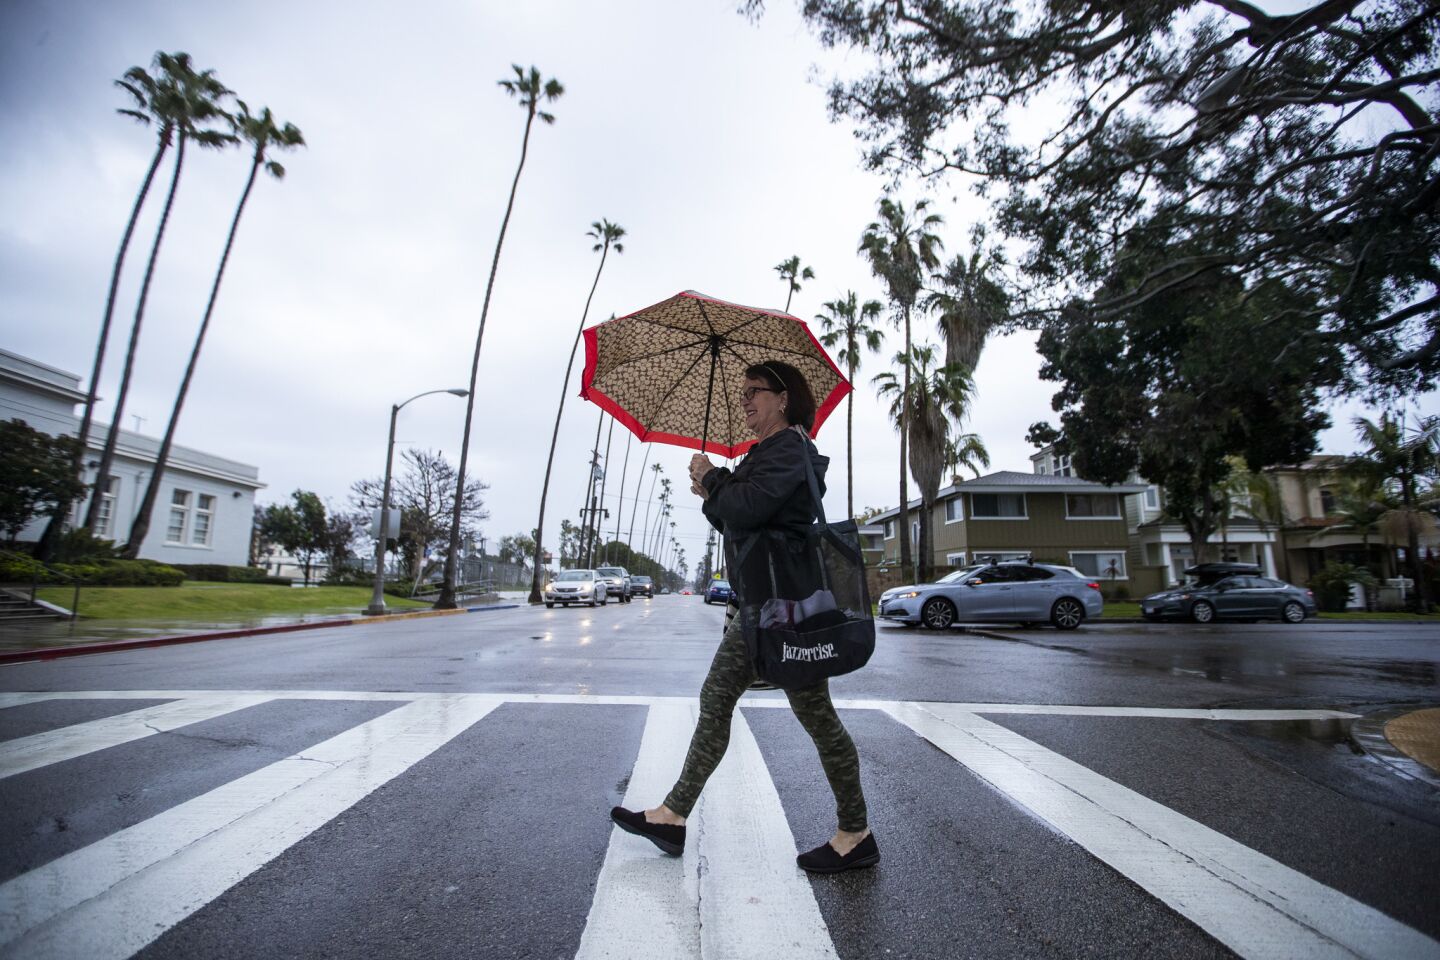 Yet another atmospheric river drenches Southland